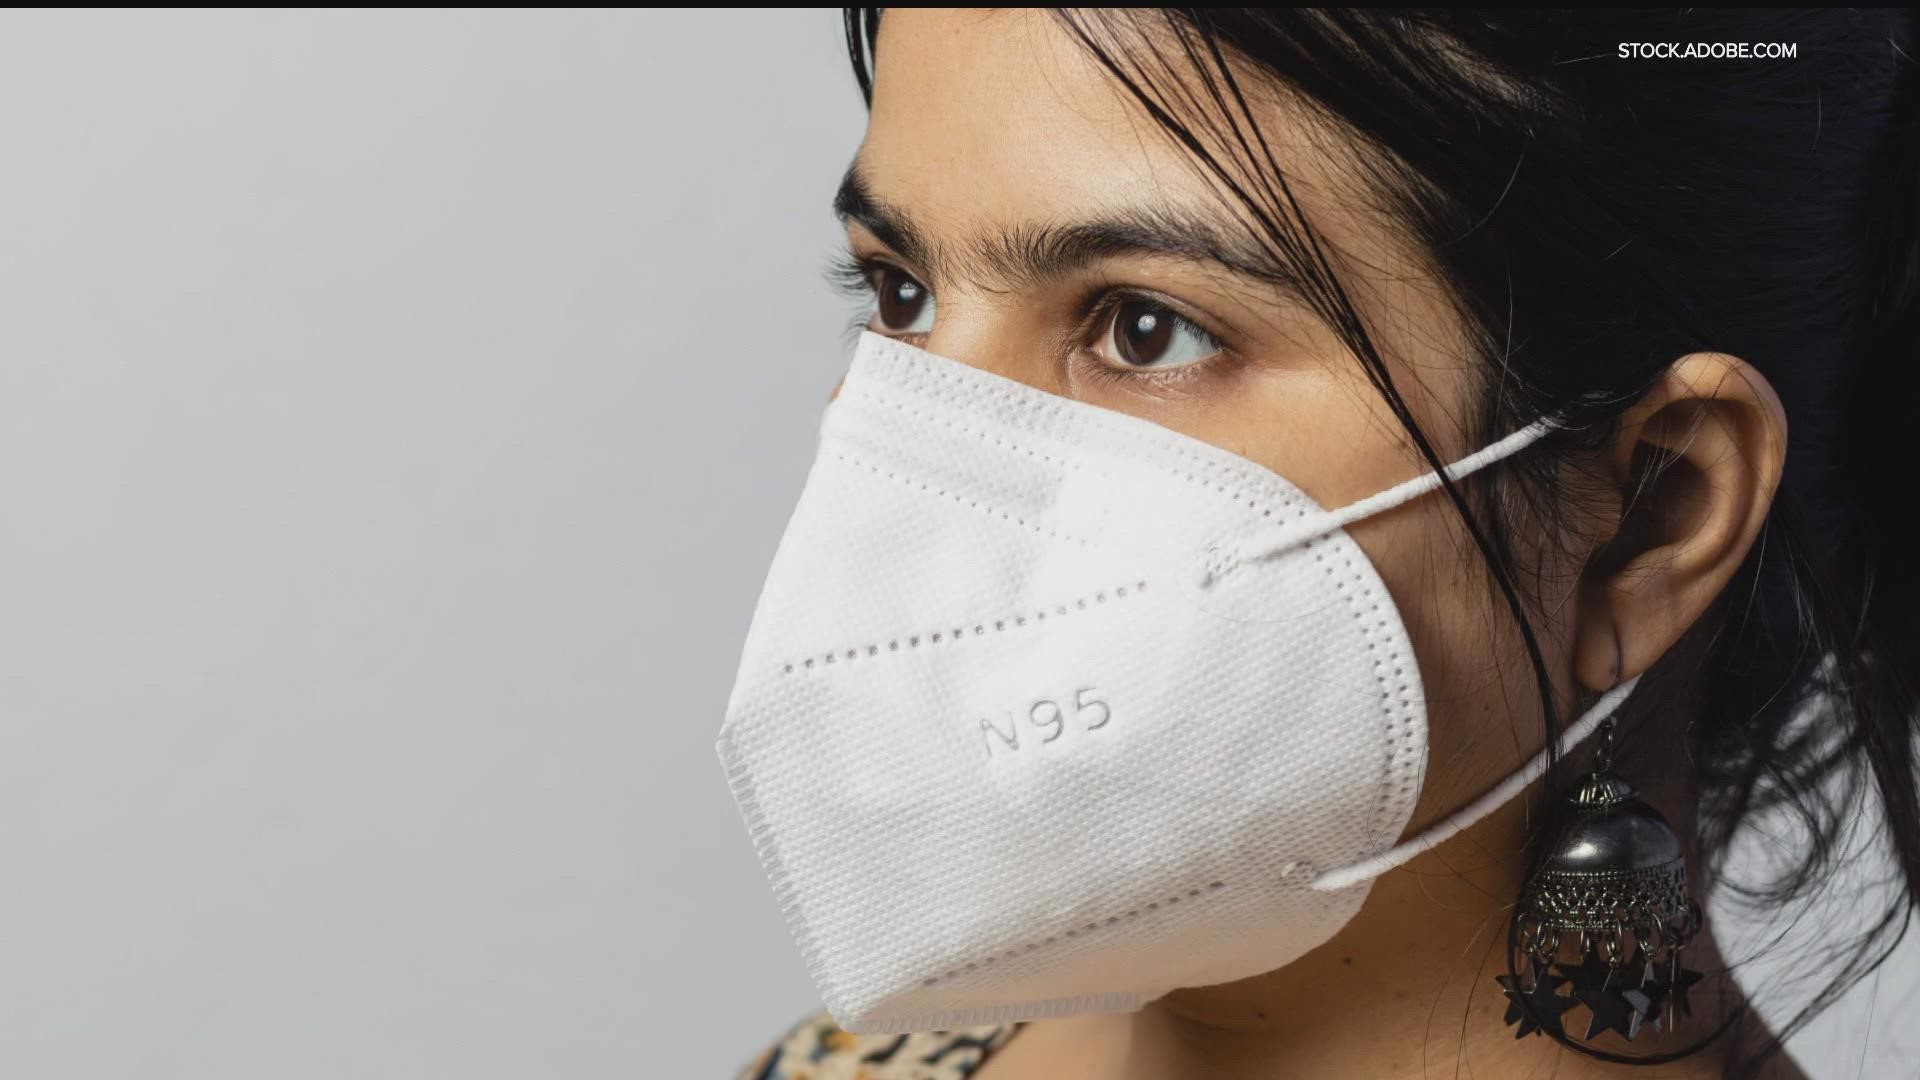 Citing a seven-day increase in COVID-19 cases, Minneapolis is re-recommending that both vaccinated and unvaccinated people wear face coverings while indoors.